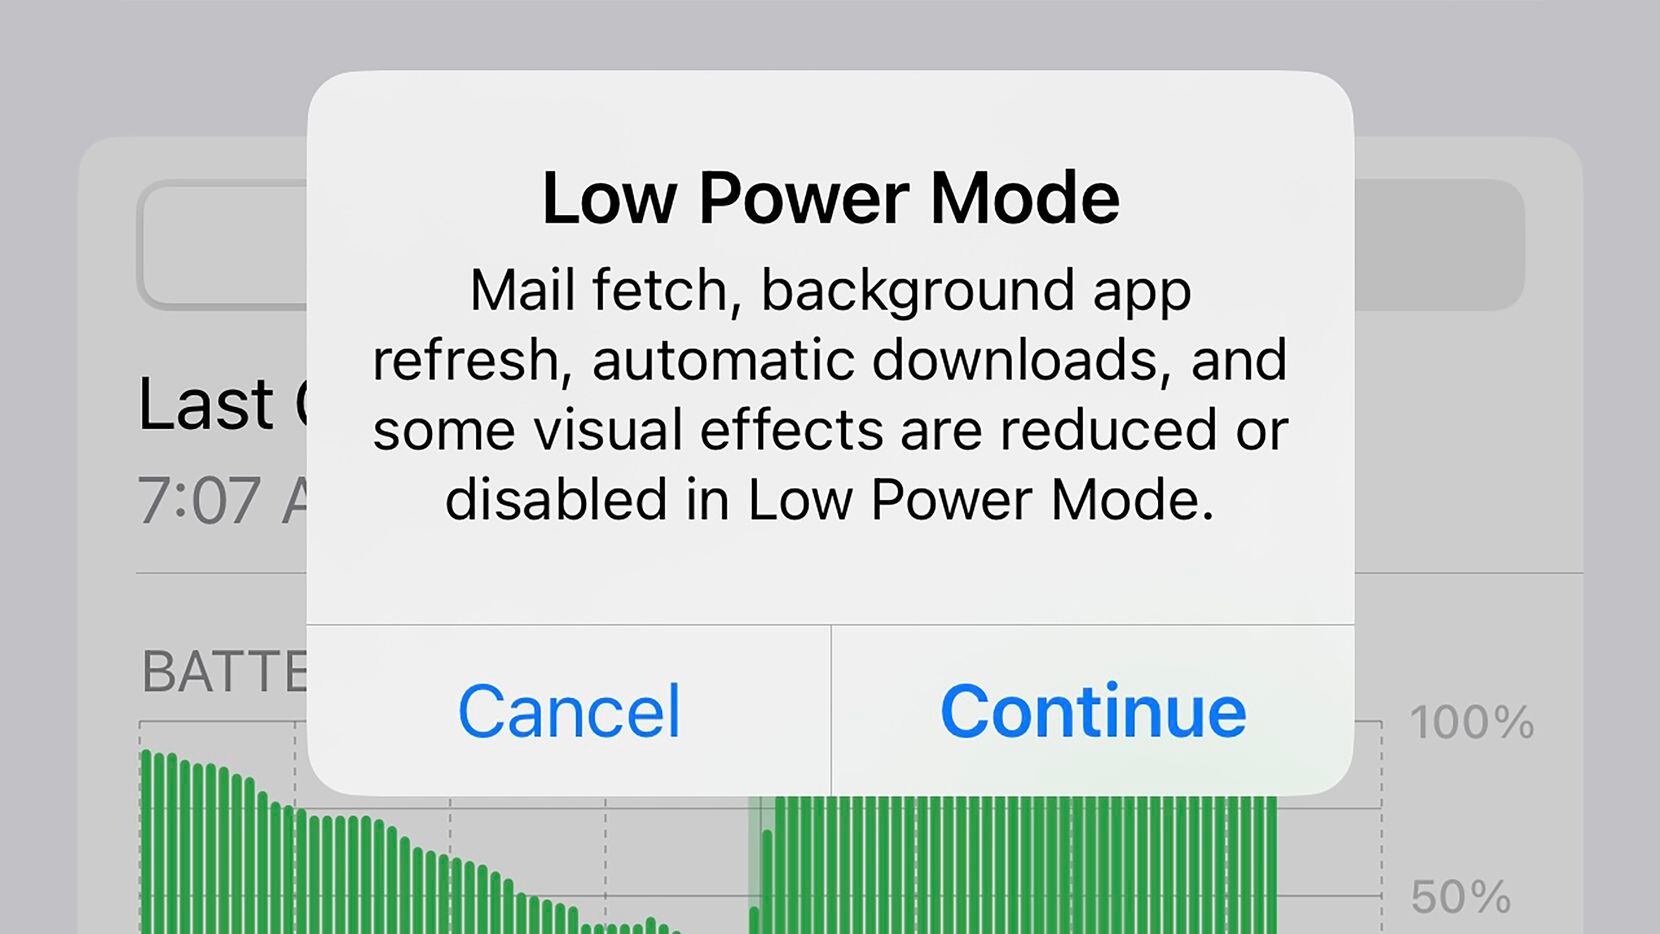 Low power mode on an iPhone reduces background activity like downloads and mail fetch.